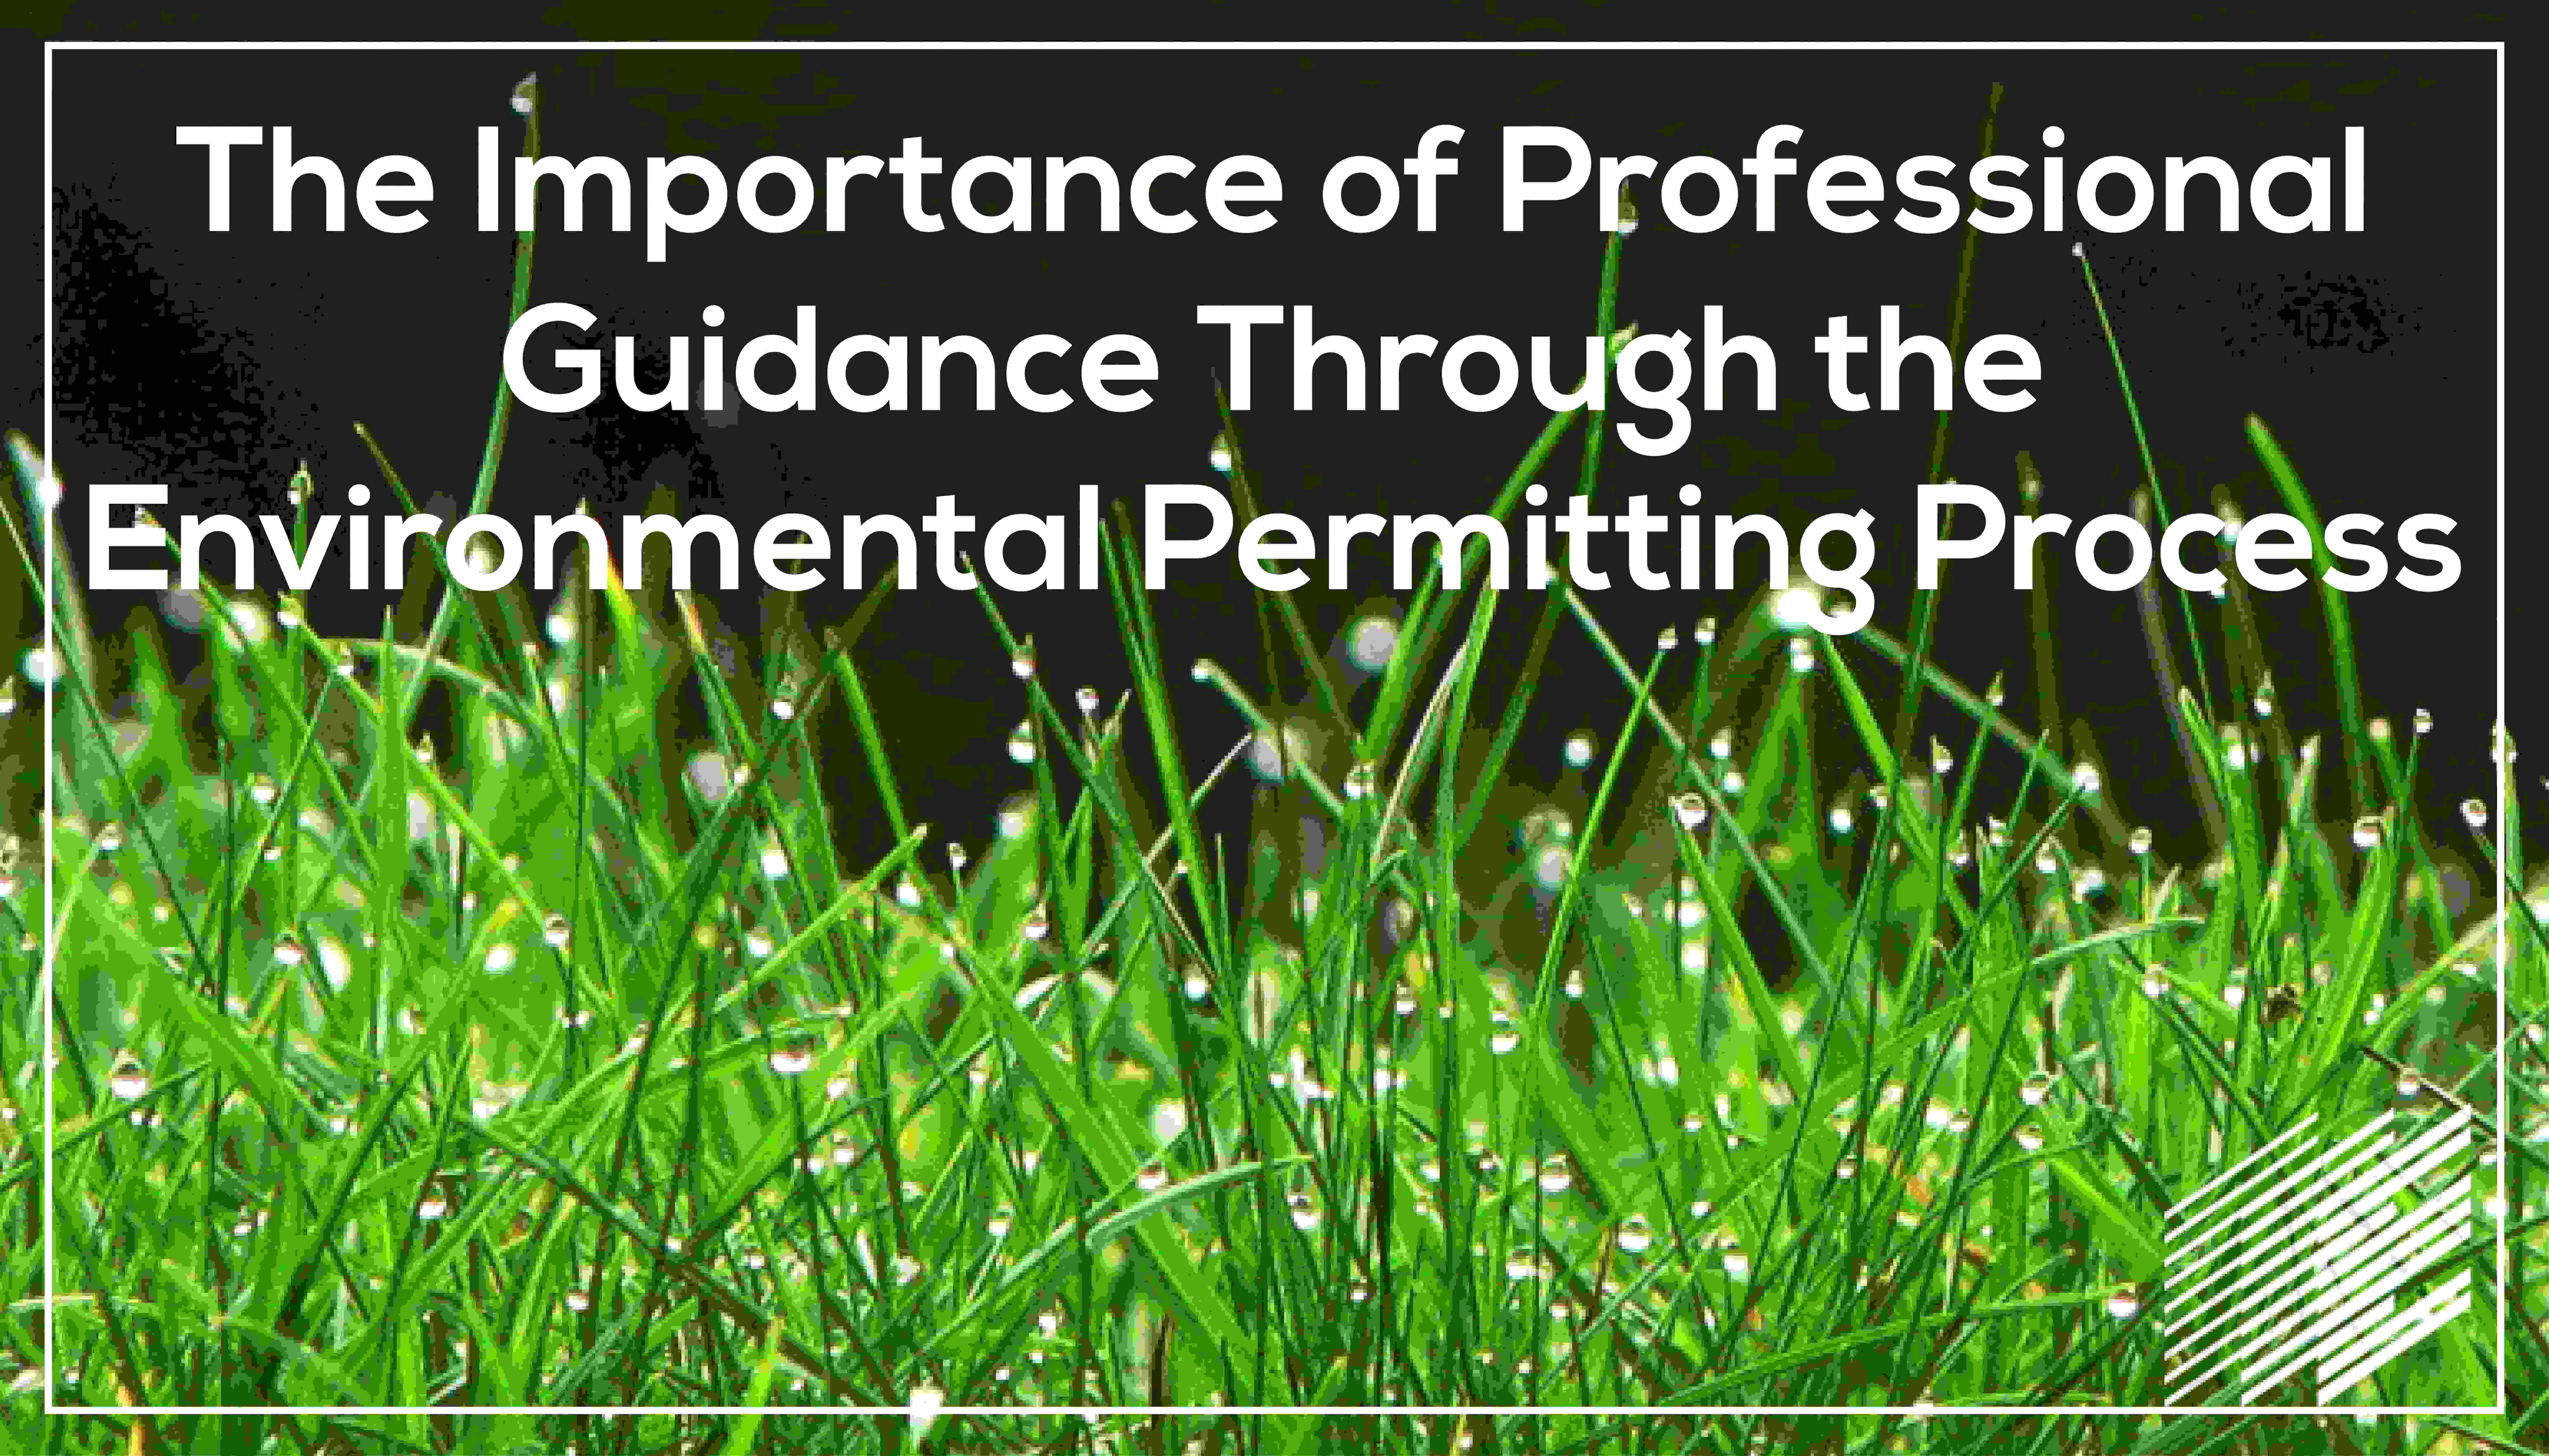 Fun Fact Friday: The Importance of Professional Guidance Through the Environmental Permitting Process